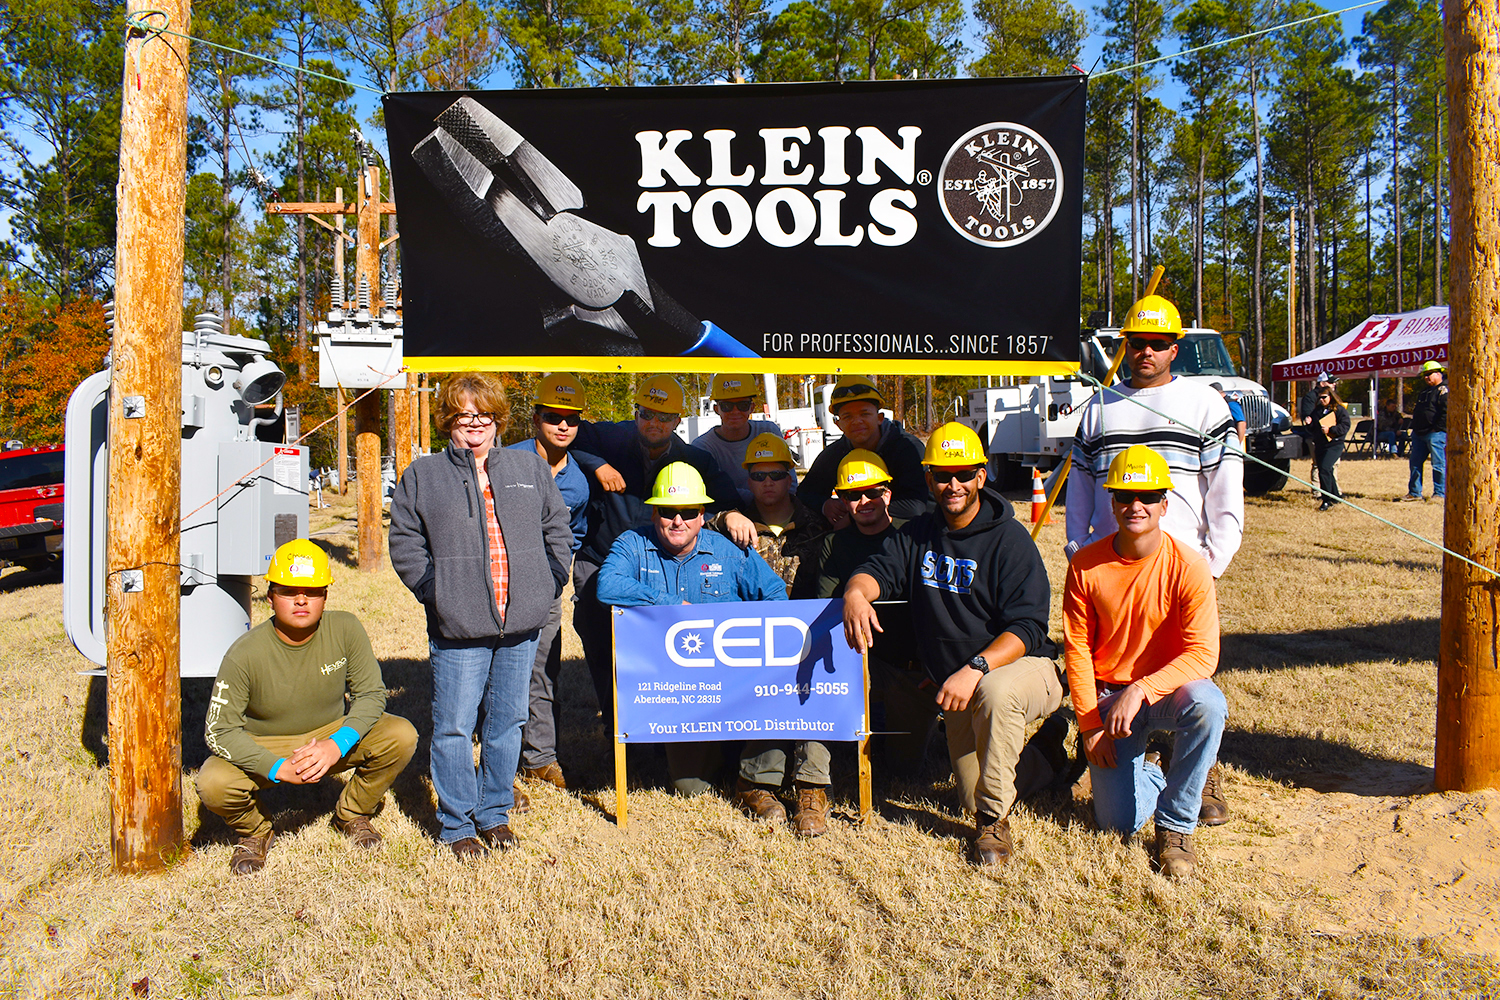 Electric lineman students stand with sales rep by Klein Tools sign